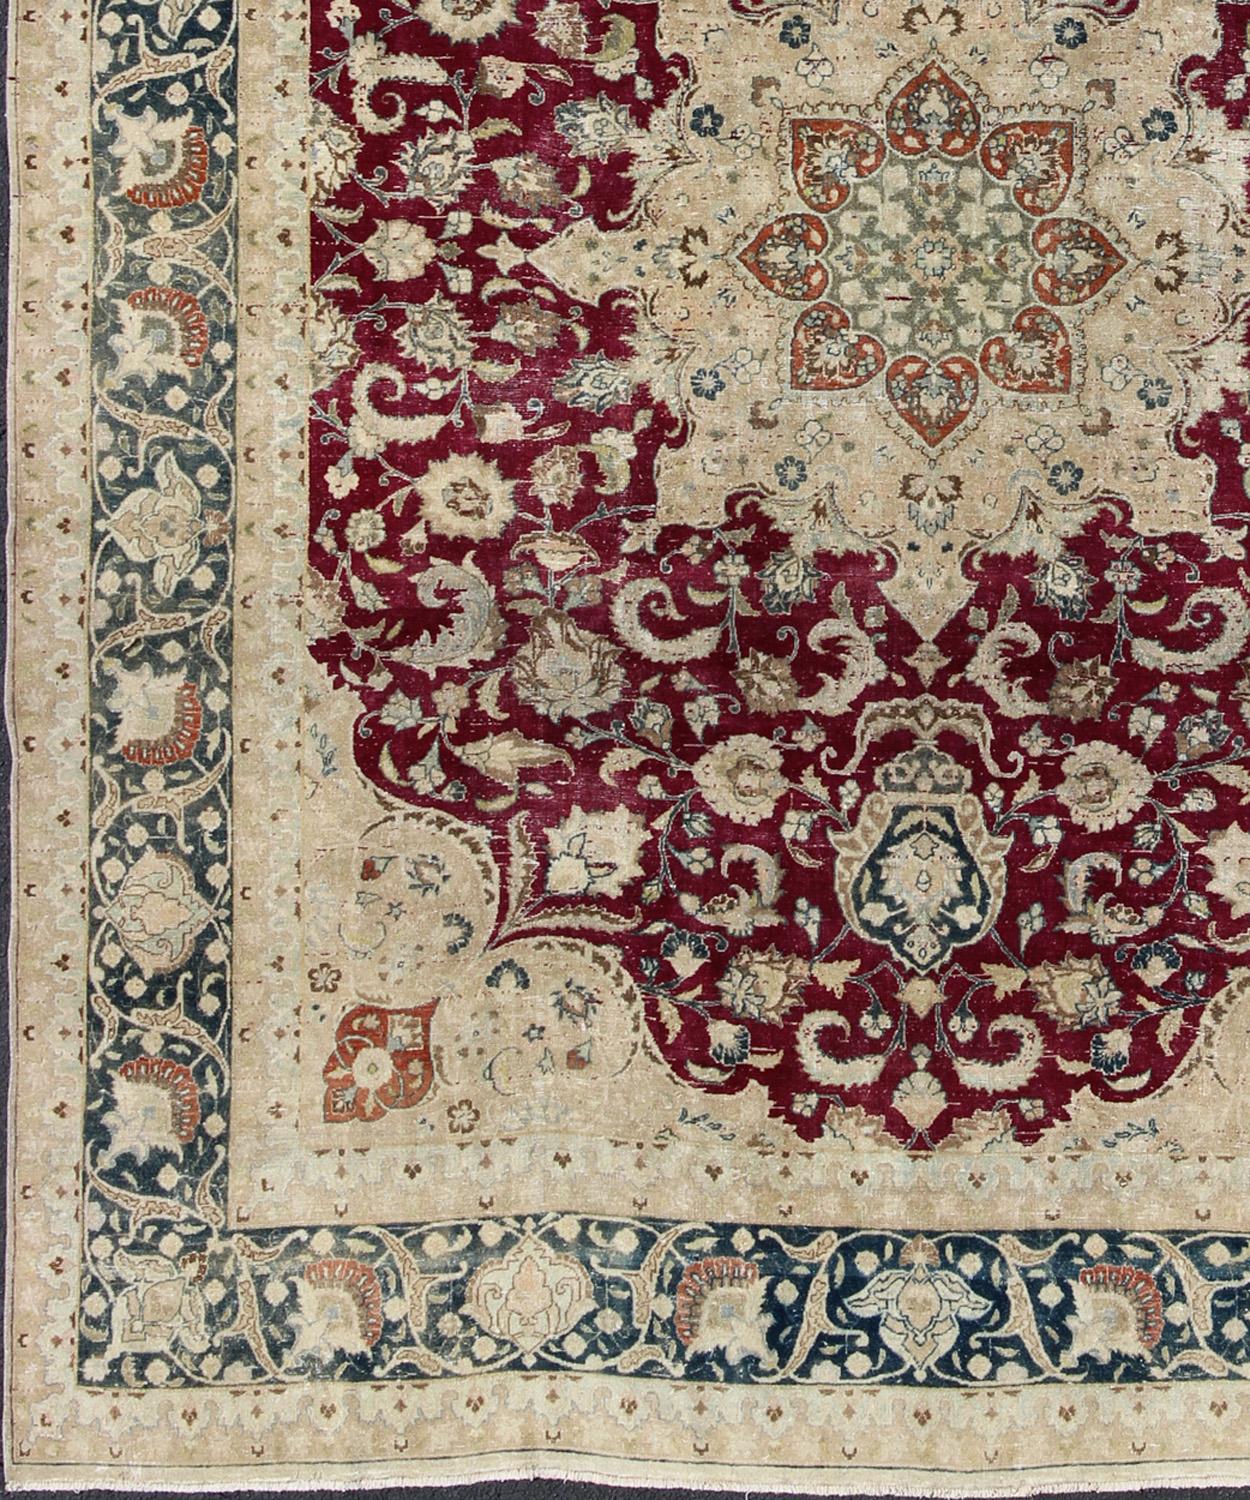 Antique Persian Mashad Rug, rug DSP-MKN380KS, country of origin / type: Iran / Mashad, circa Early-20th Century.

Measures: 9'9 x 12'6.

This highly decorative and elaborate antique Persian Mashad carpet features a layered, multi-tiered central